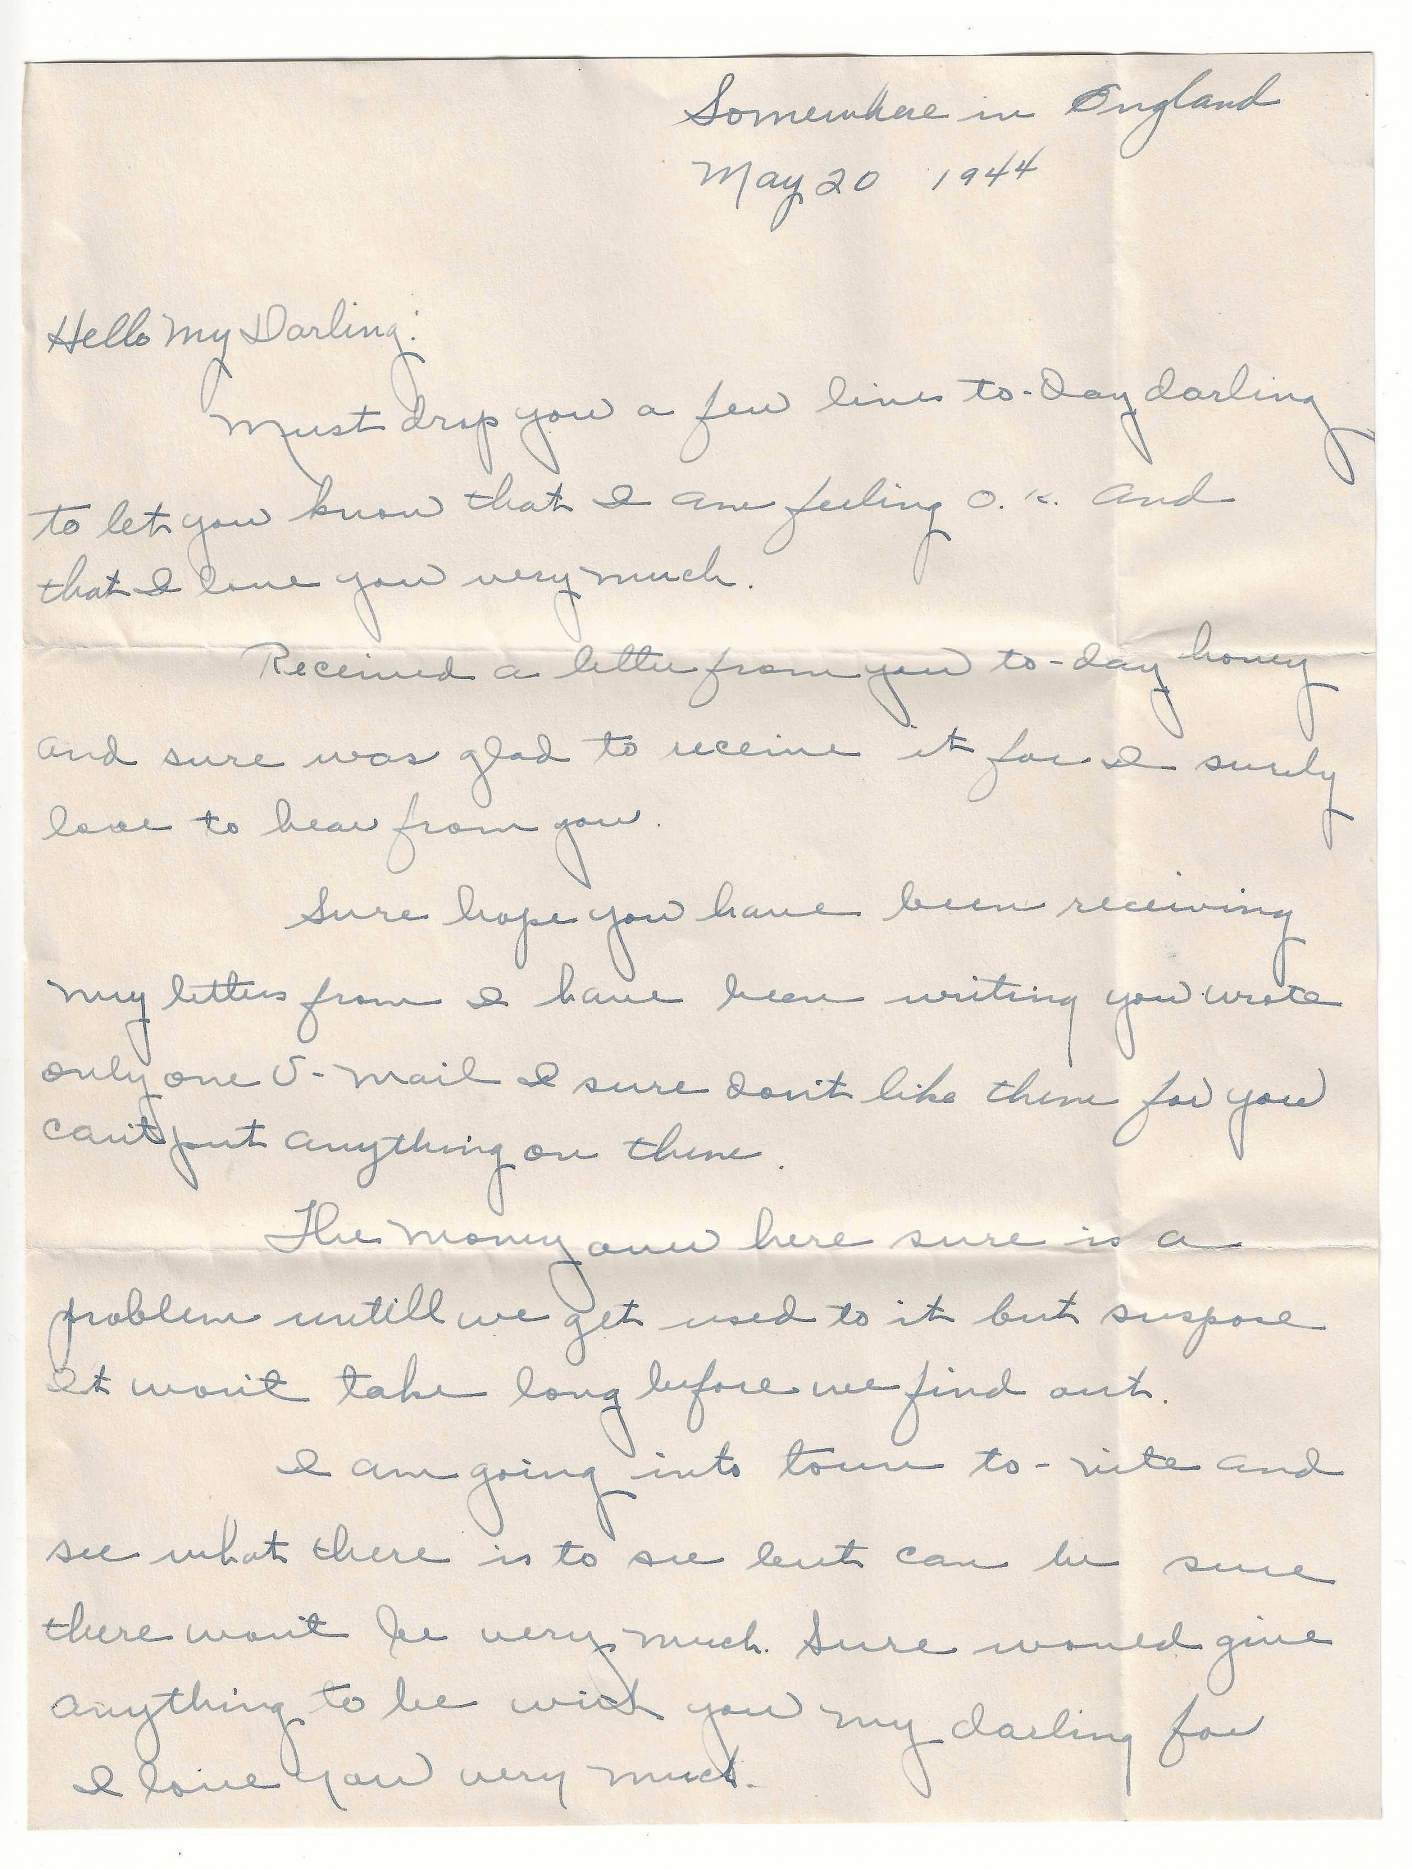 WW2 Era Letter Written by member of the Famous “Ghost Army”